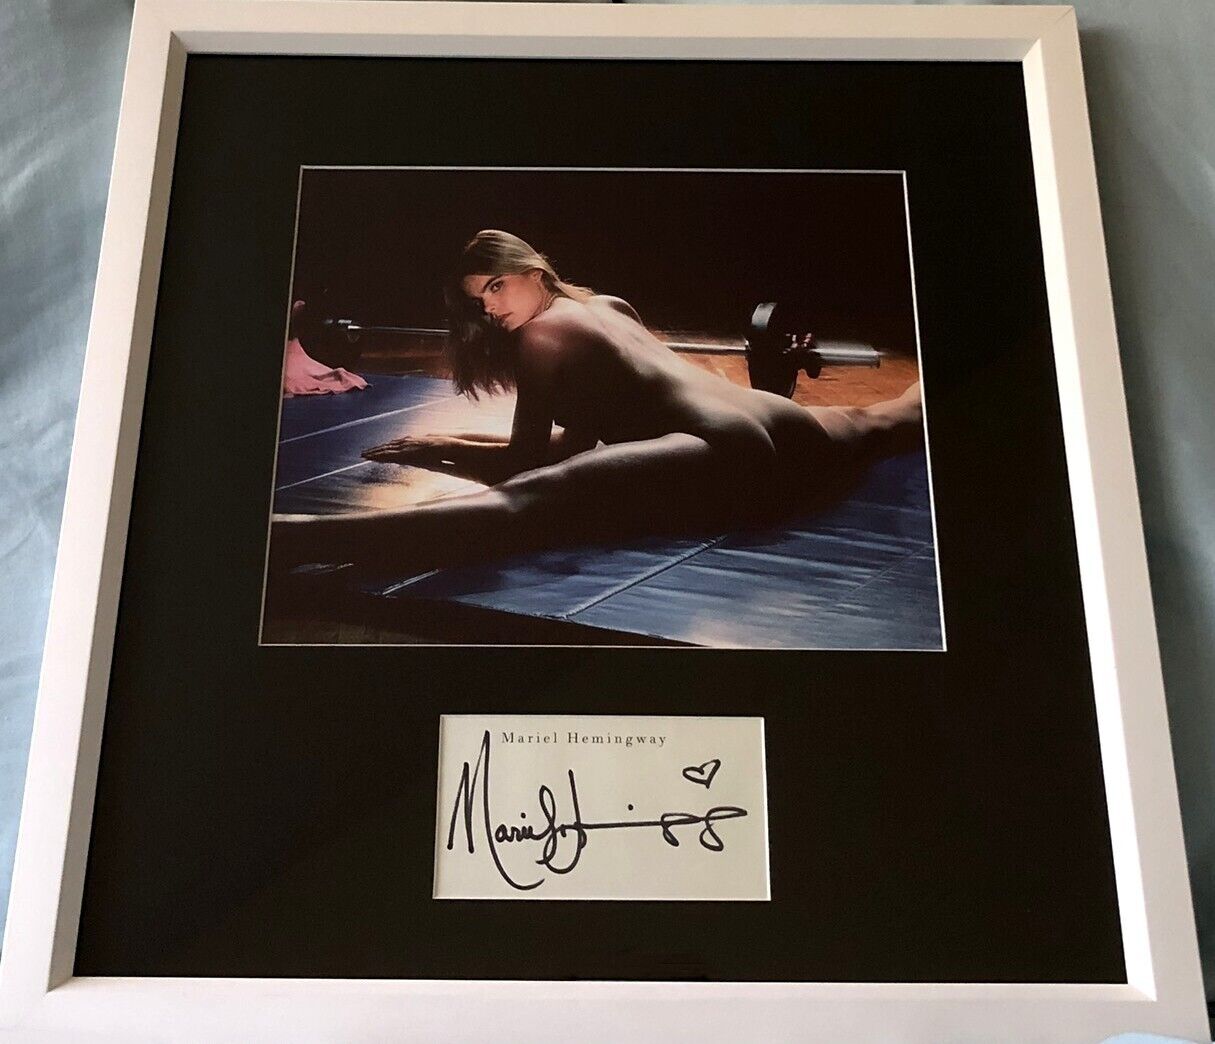 Mariel Hemingway autograph signed auto framed with sexy Star 80 8x10 movie photo